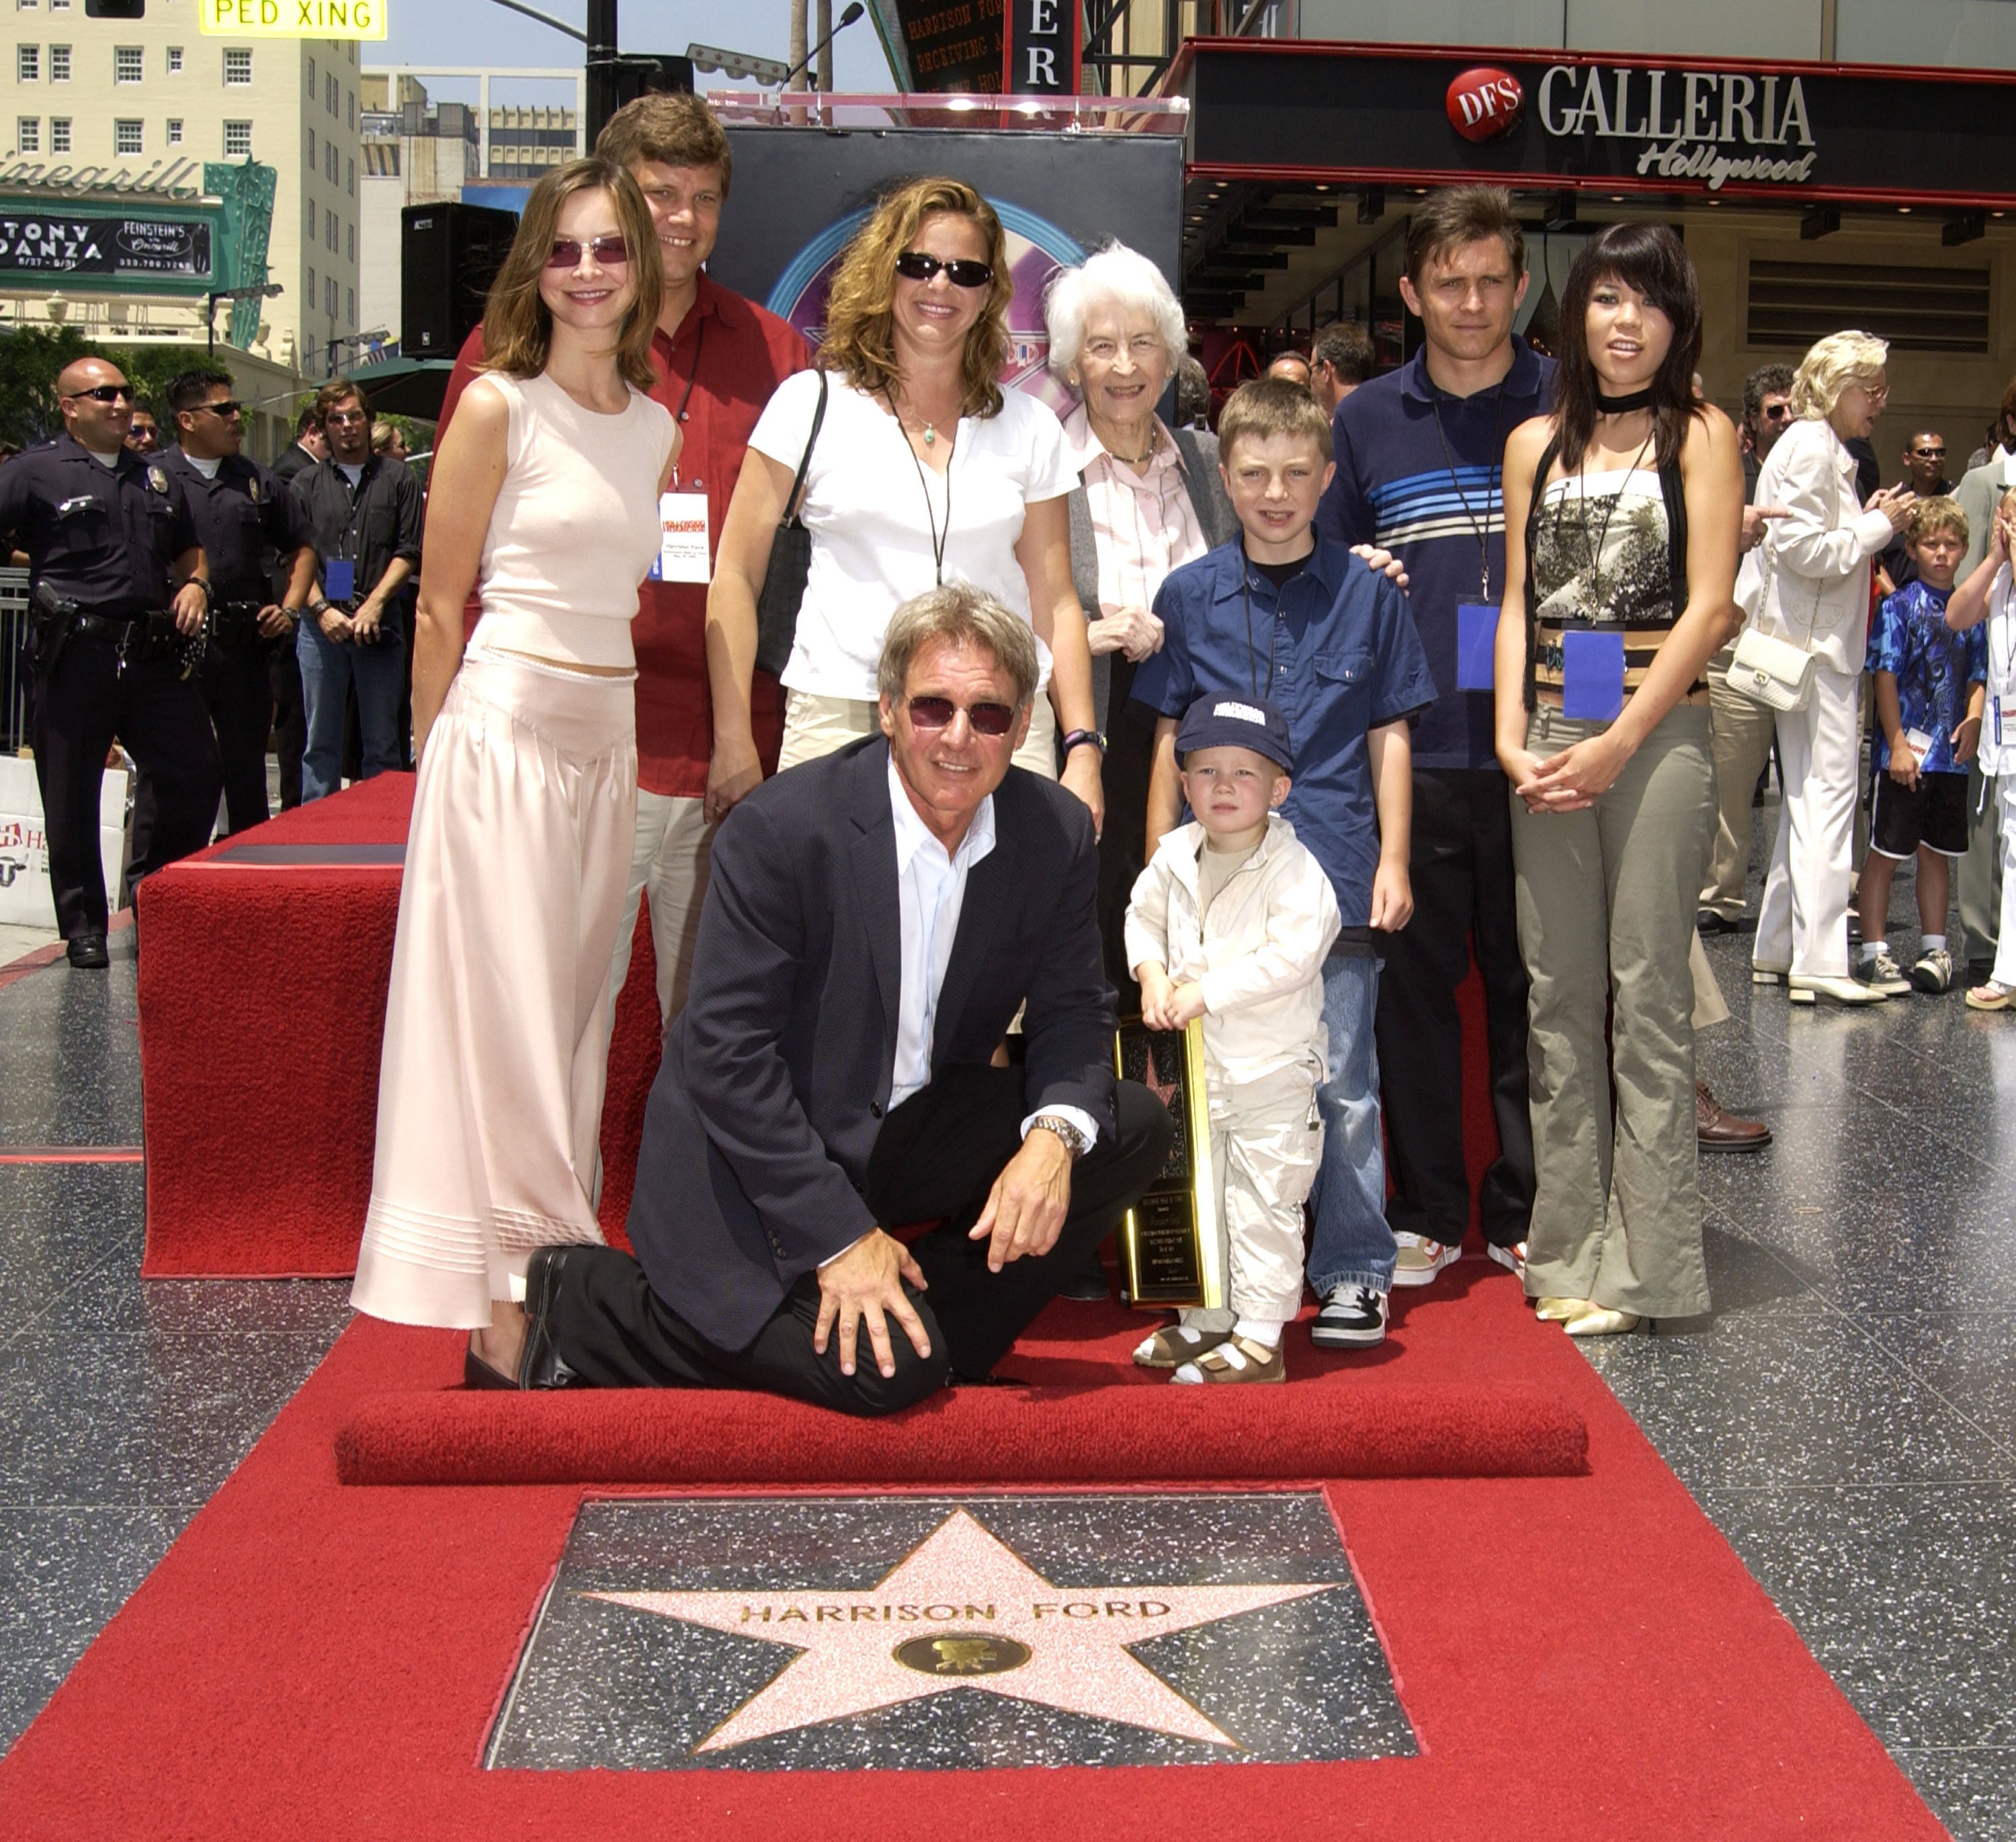 Harrison Ford, Calista Flockhart, and some of his family members as he's honored with a Star on the Hollywood Walk of Fame on May 30, 2003. | Source: Getty Images